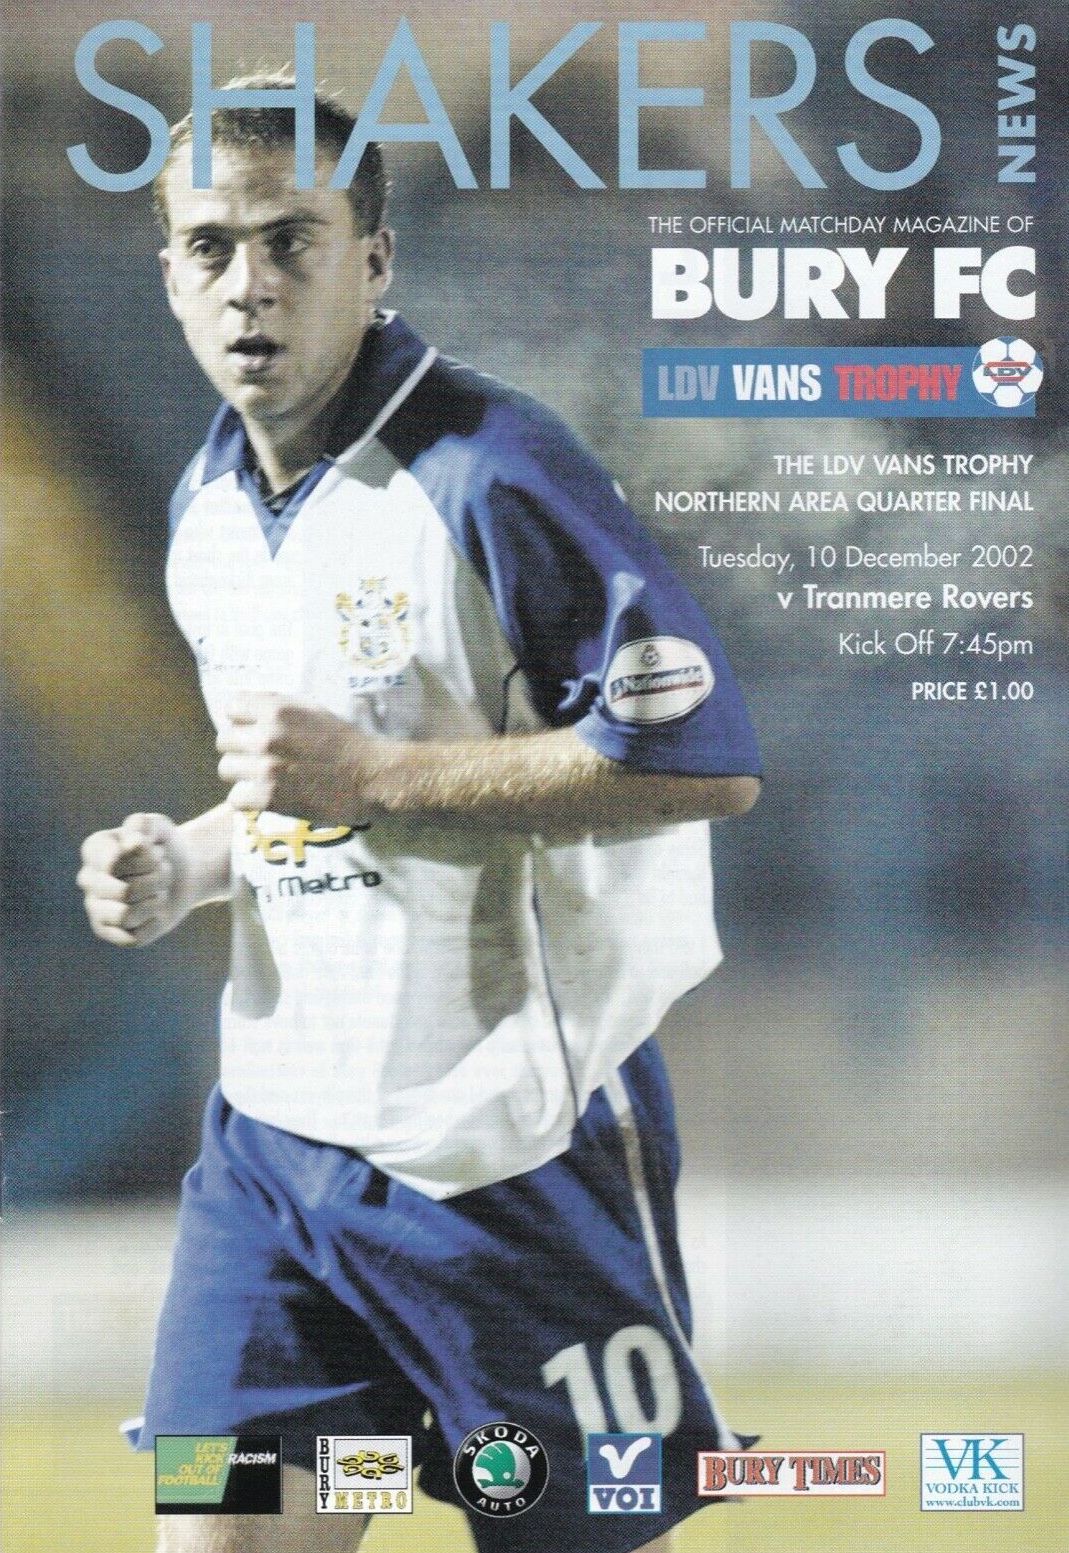 Match Programme For {home}} 2-0 Tranmere Rovers, LDV Trophy, 2002-12-10